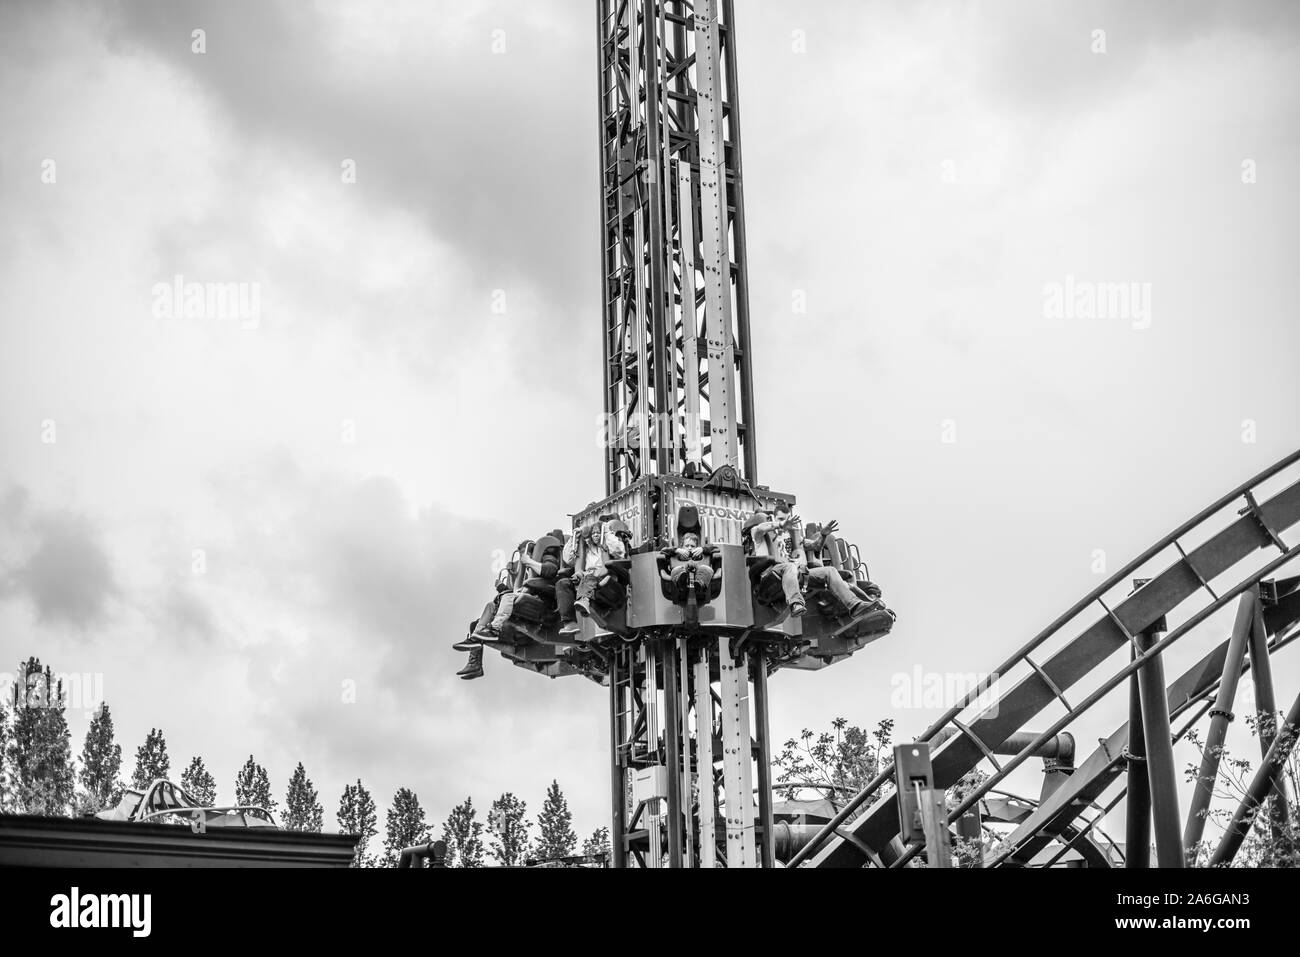 A day out at Thorpe Park, rides, roller coasters and scary thrill rides at one of the UKs famous theme parks Stock Photo